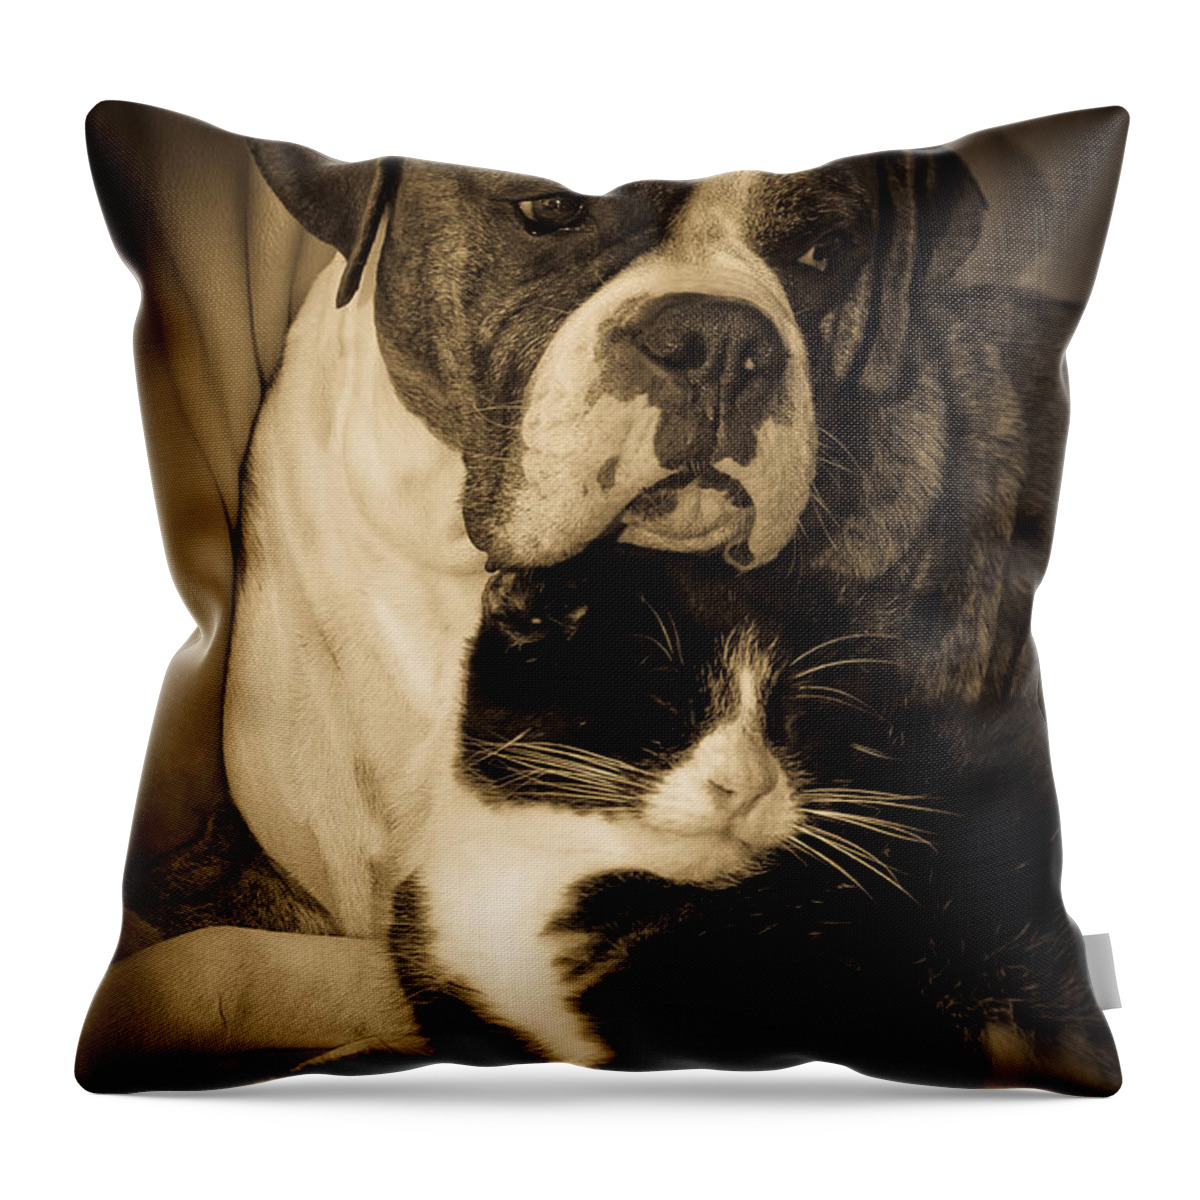 Boxer Throw Pillow featuring the photograph Opposites Attract by DigiArt Diaries by Vicky B Fuller